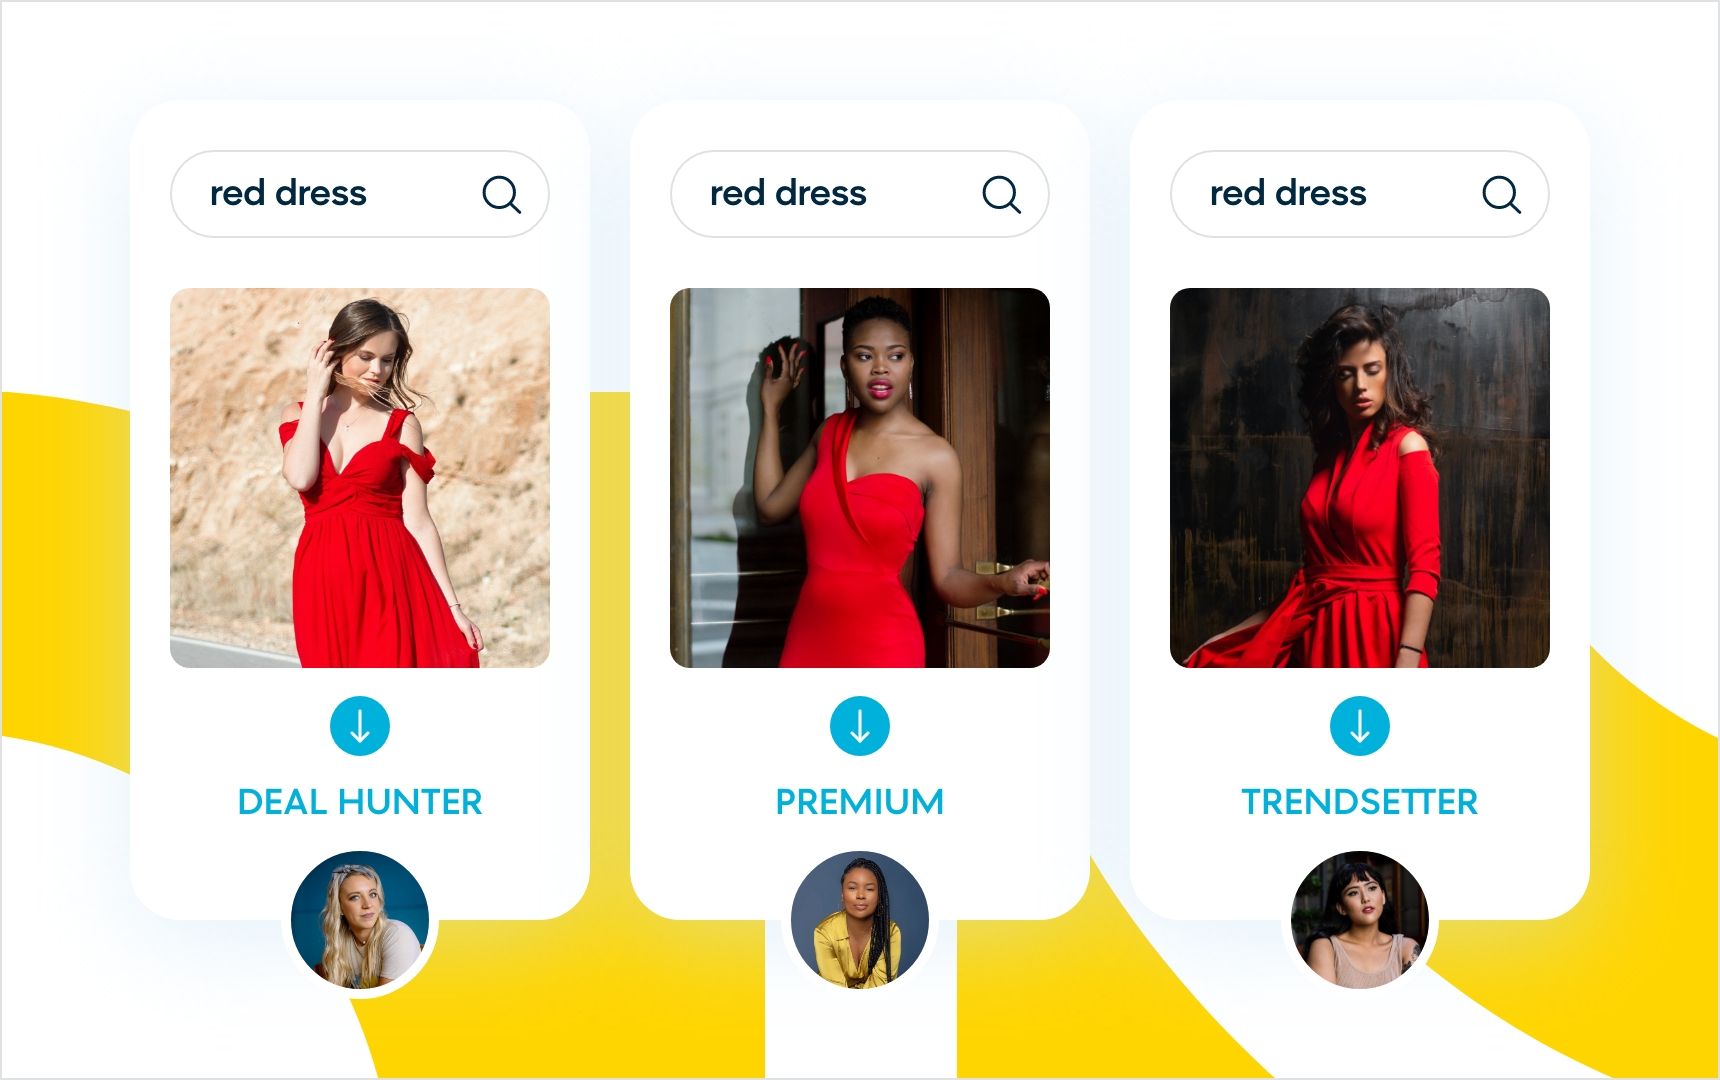 Showing different red dresses based on customer segment